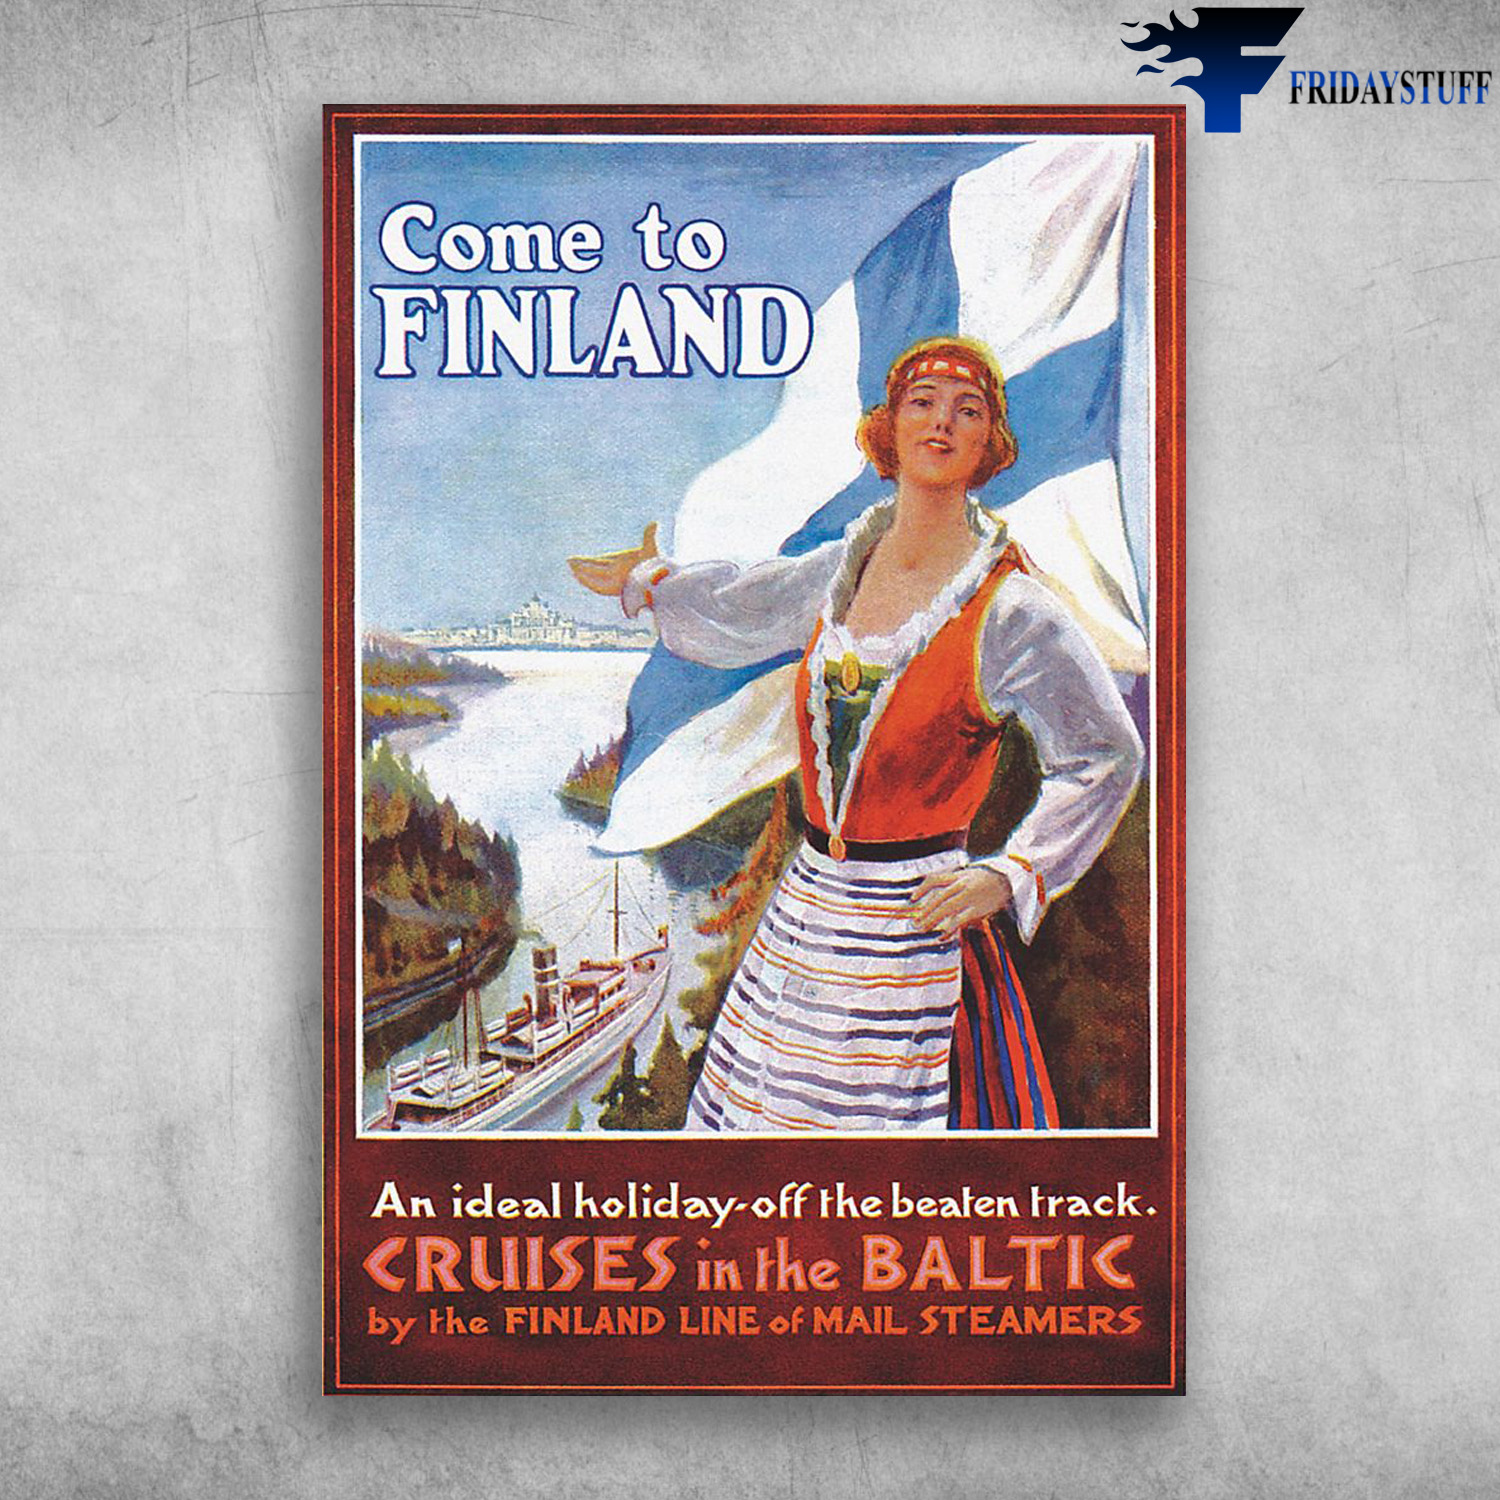 Finland Girl - Come To Finland, An Ideal Holiday Off Thr Beaten Track, Cruises In The Baltic, By The Finland Line Of Mail Stramers